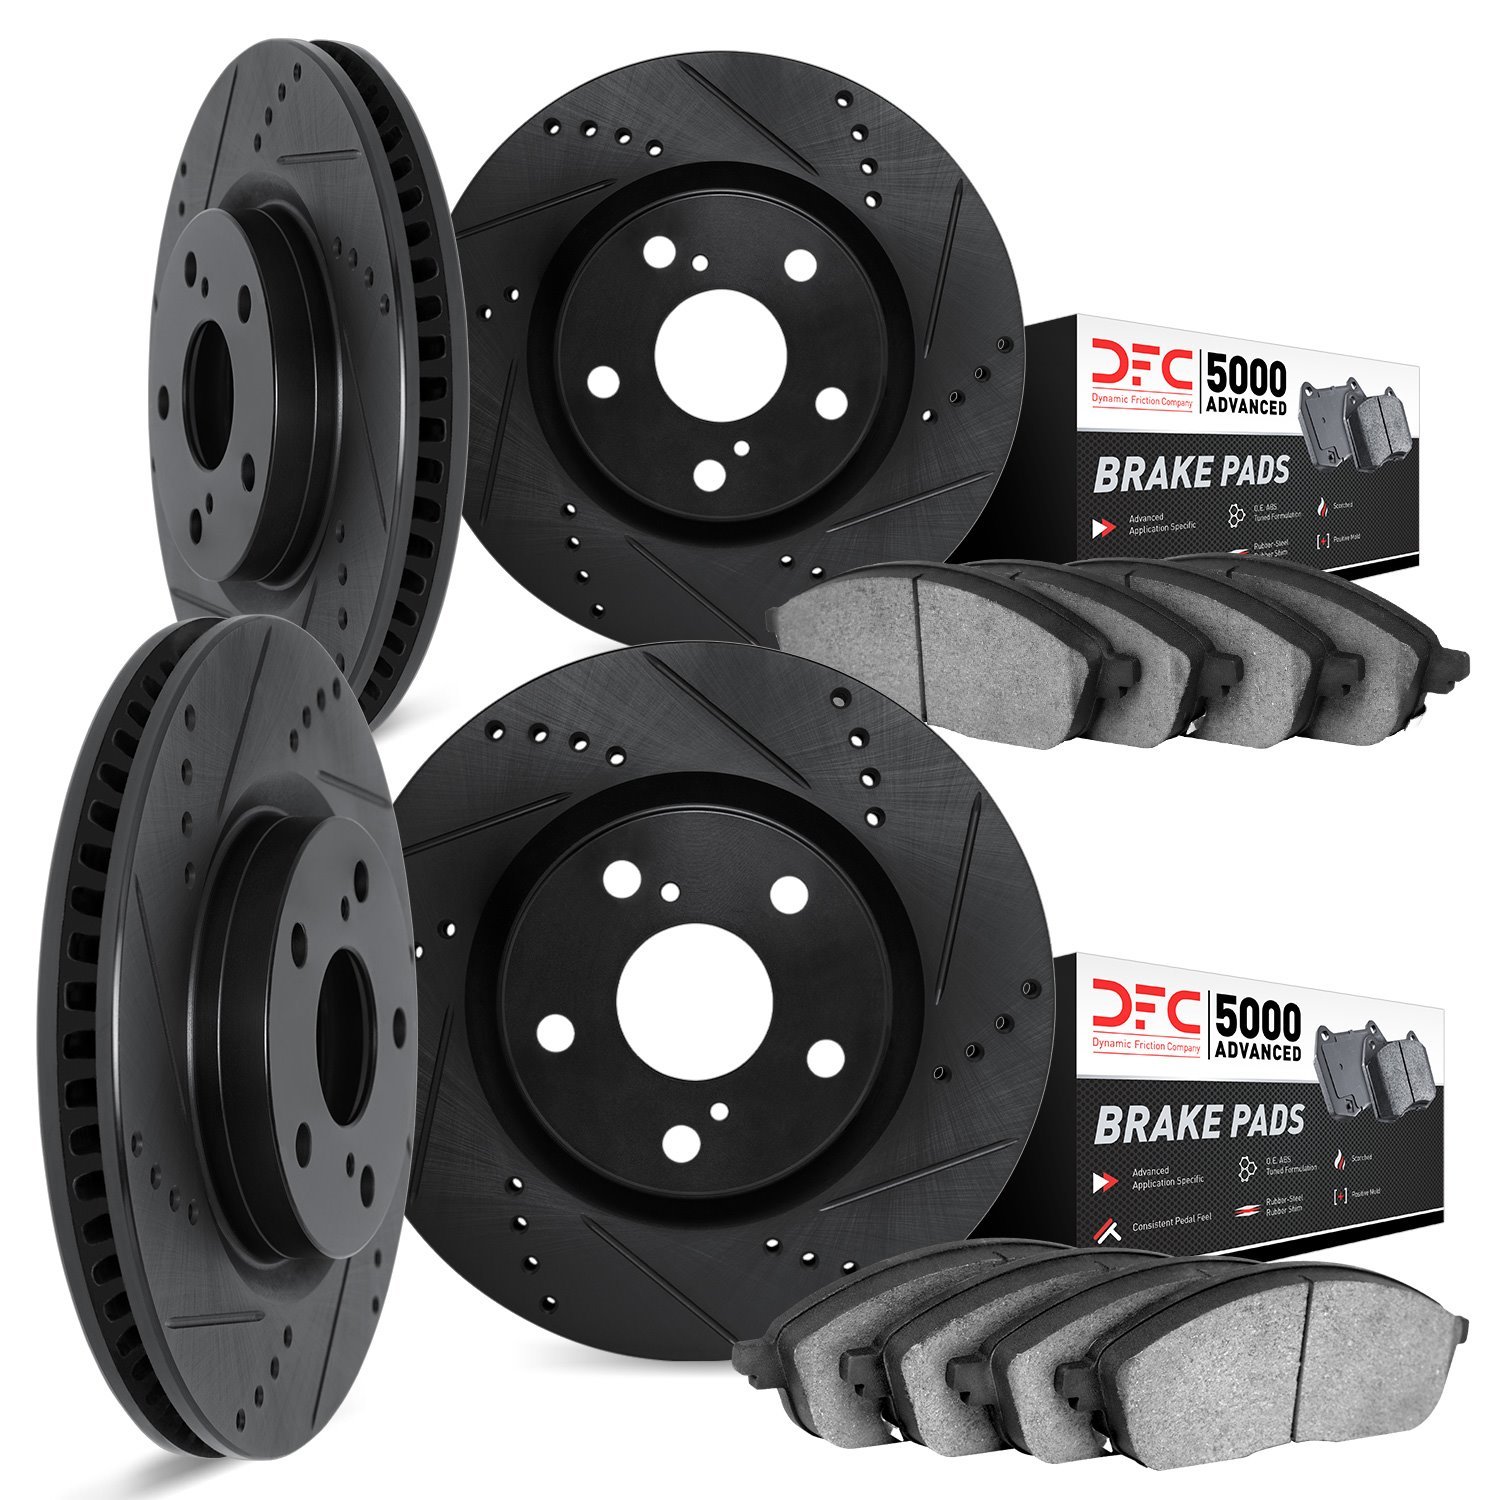 8504-02014 Drilled/Slotted Brake Rotors w/5000 Advanced Brake Pads Kit [Black], 1991-1994 Porsche, Position: Front and Rear